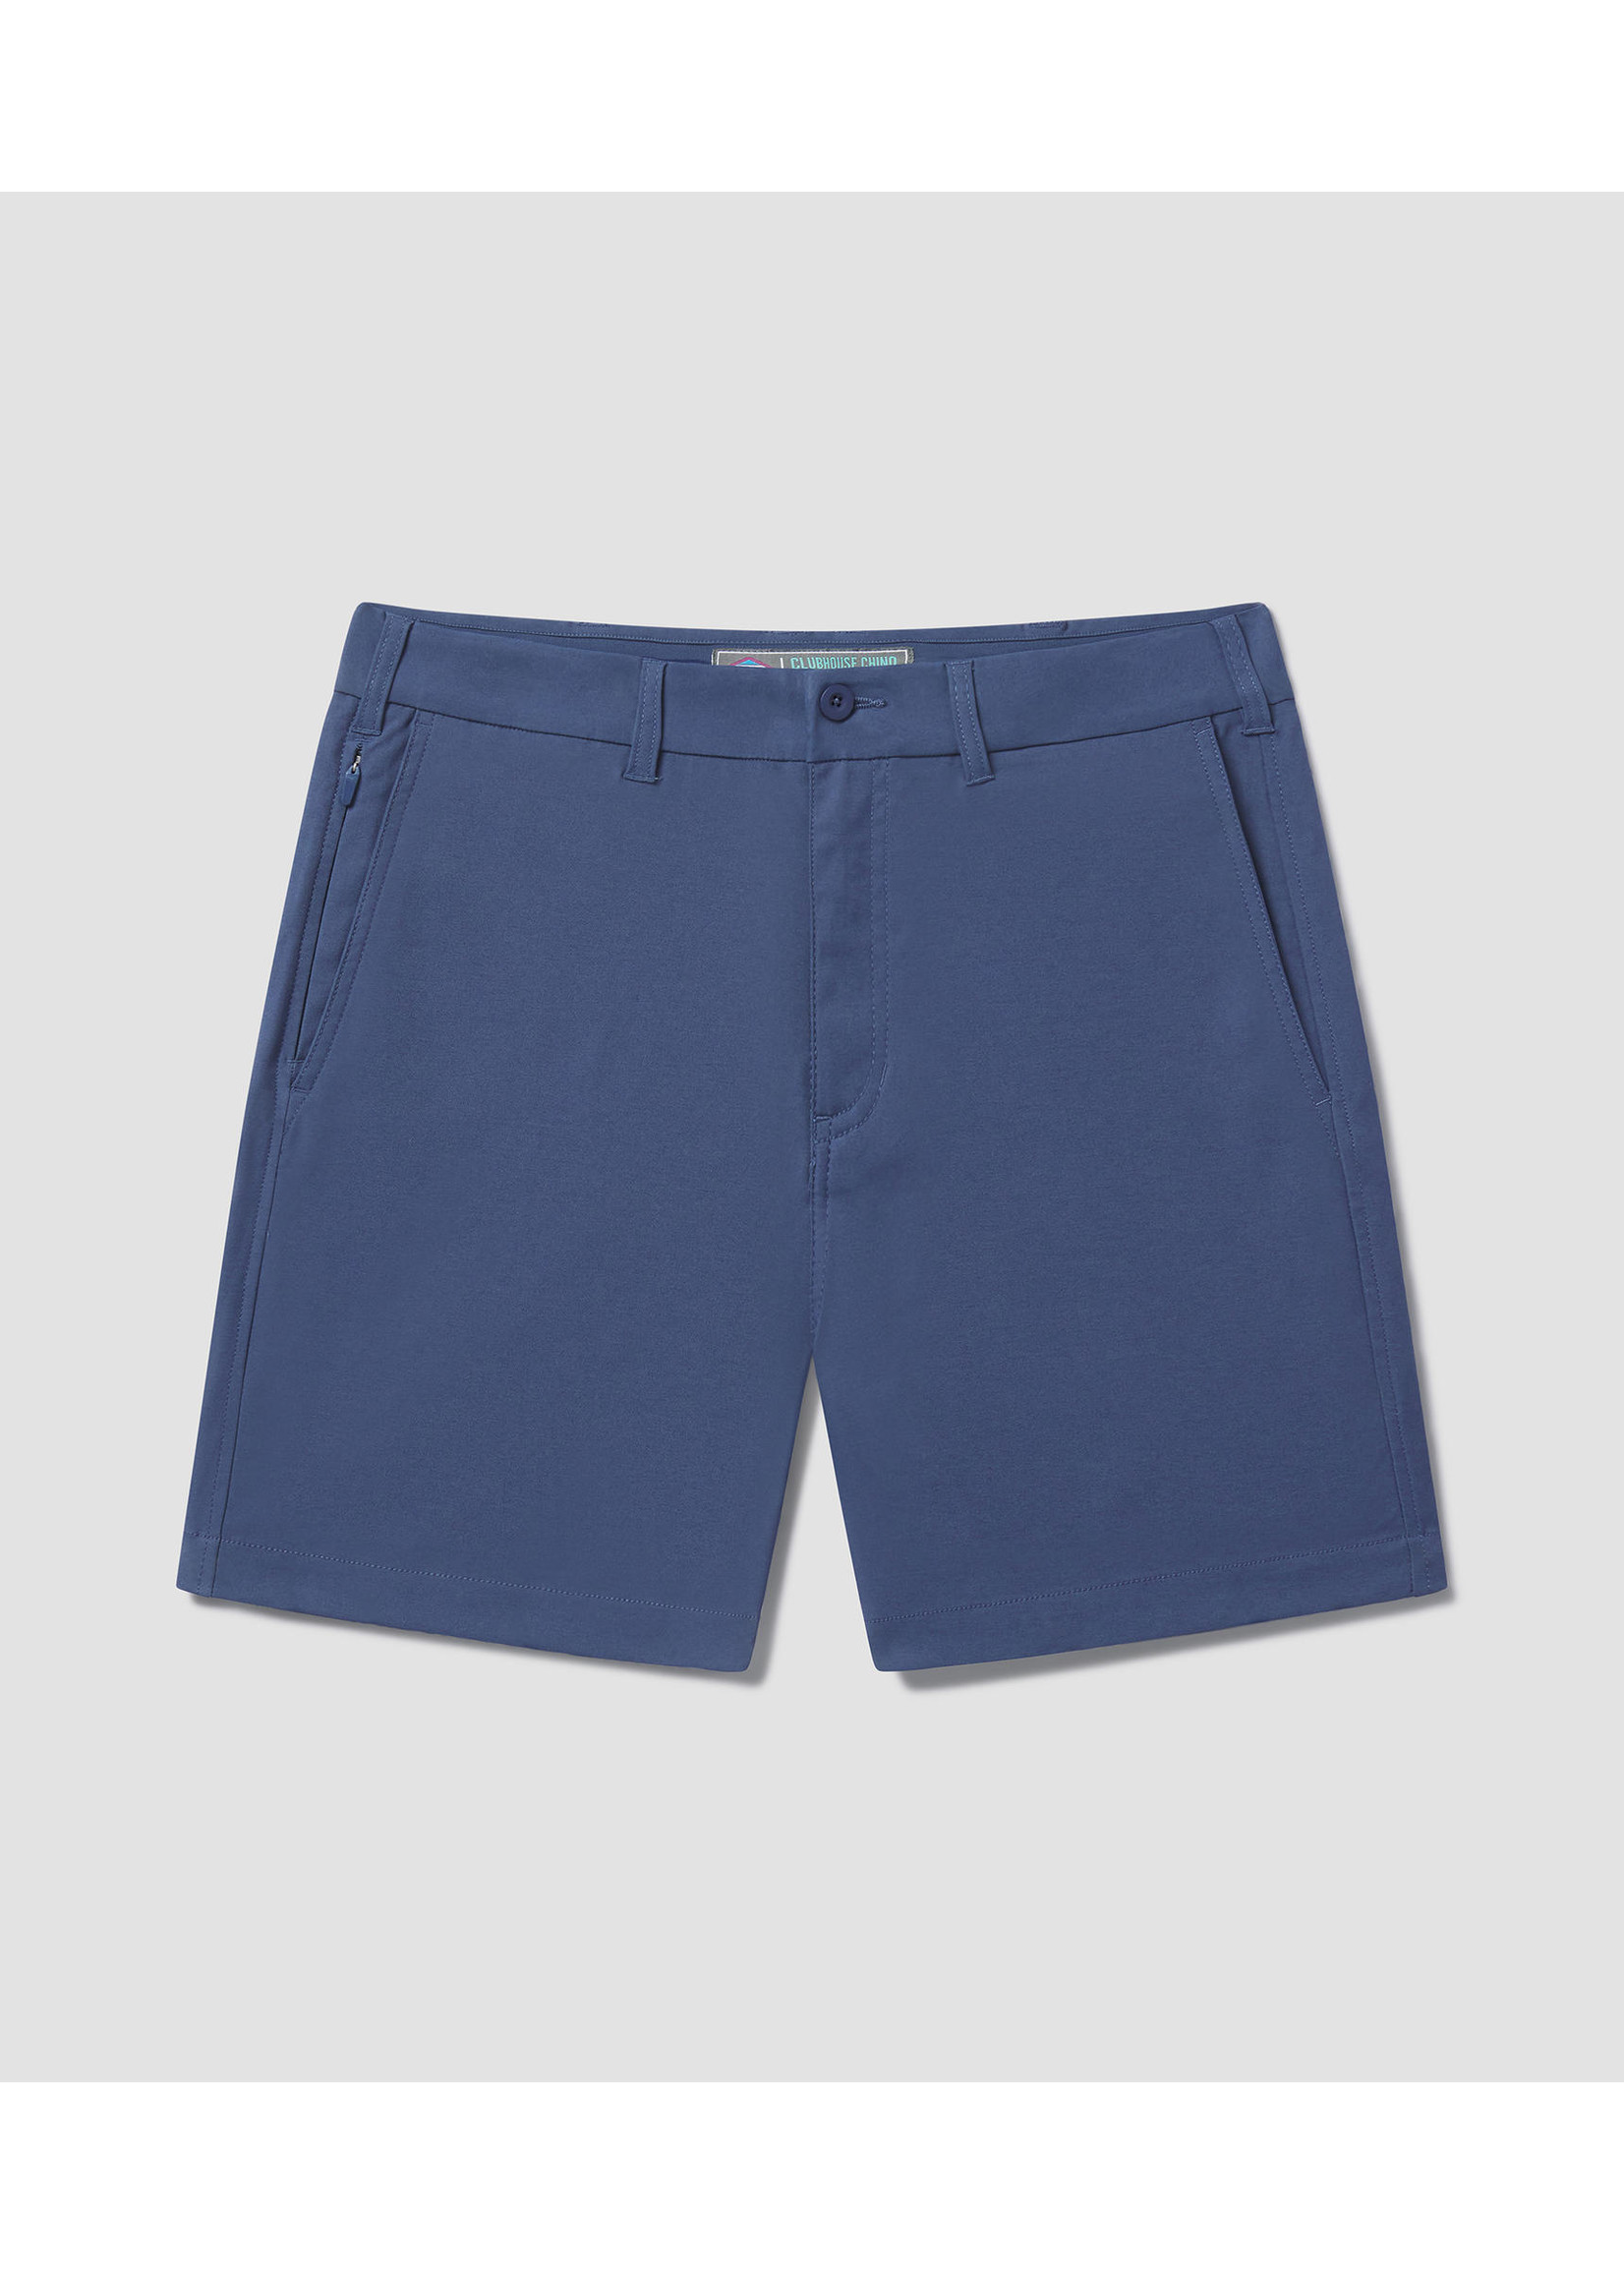 Southern Shirt Clubhouse Performance Chino Shorts